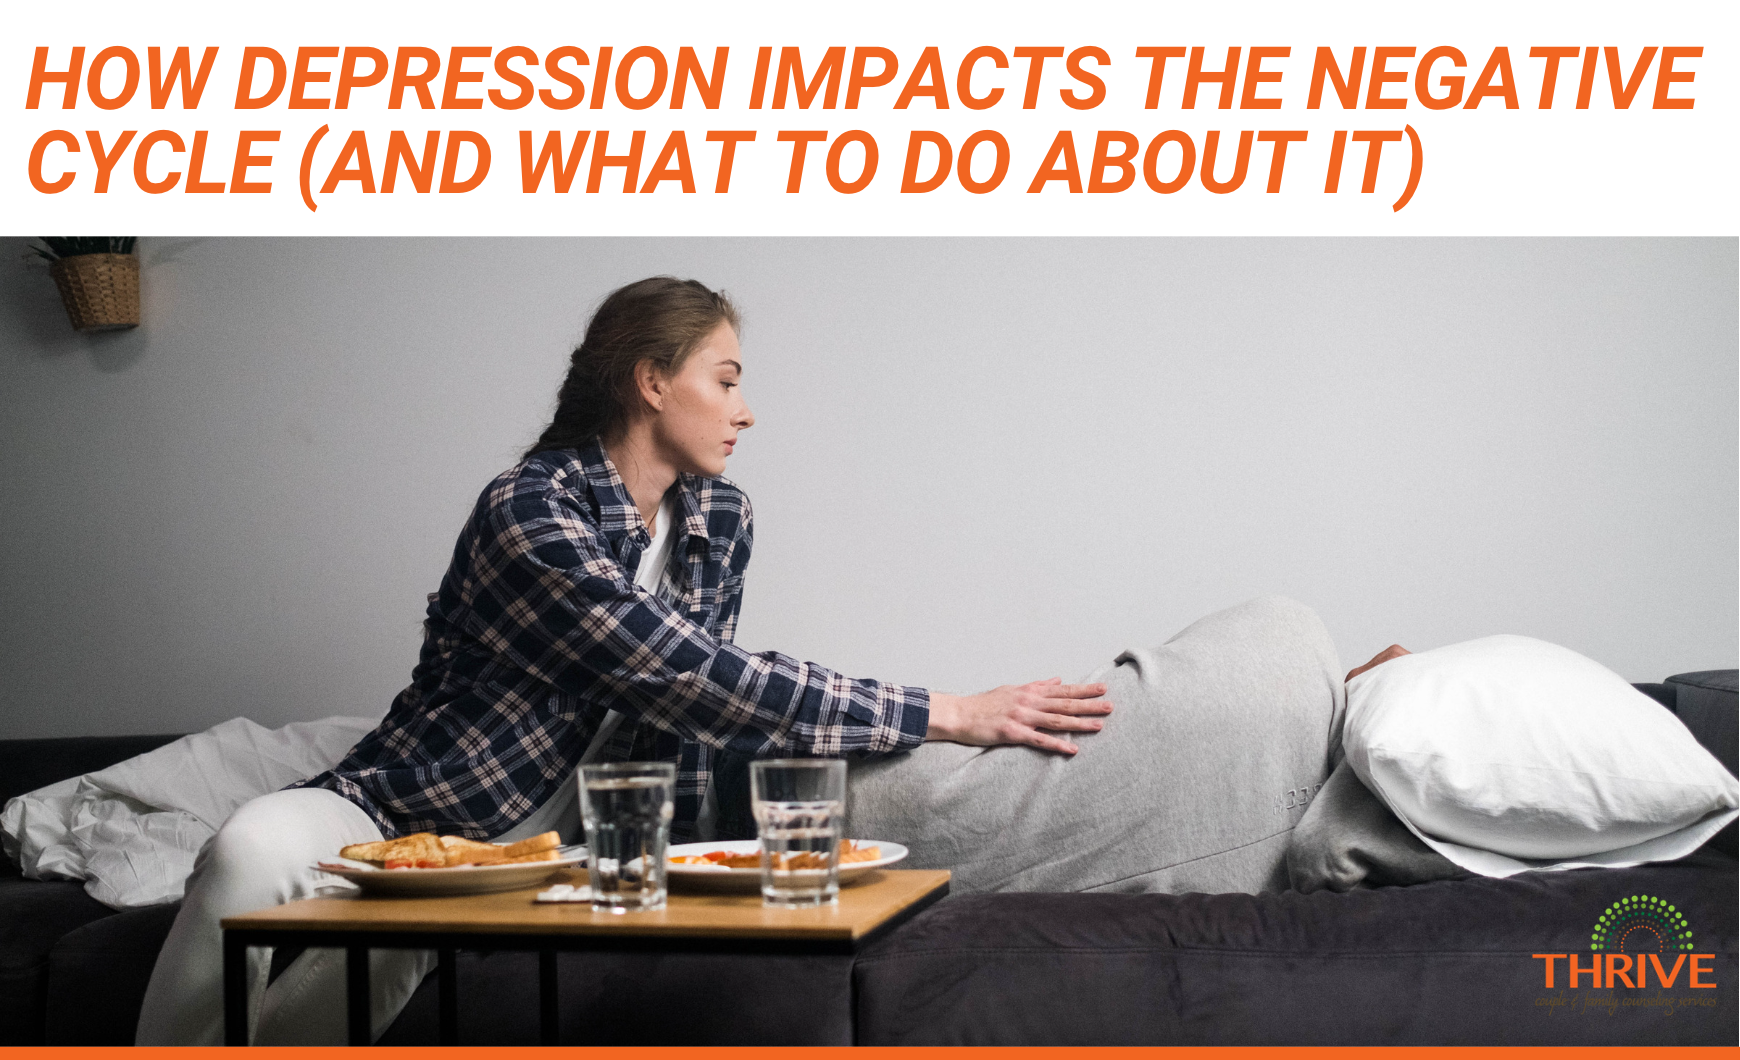 A graphic that reads "How Depression Impacts the Negative Cycle (And What to Do About It)" in orange font above a stock photo of a white woman sitting on the edge of a couch, touching the side of another person, who is lying on their side with their head under the pillow, away from the camera. In front of the couch there's a small table with plates of food and glasses of water.